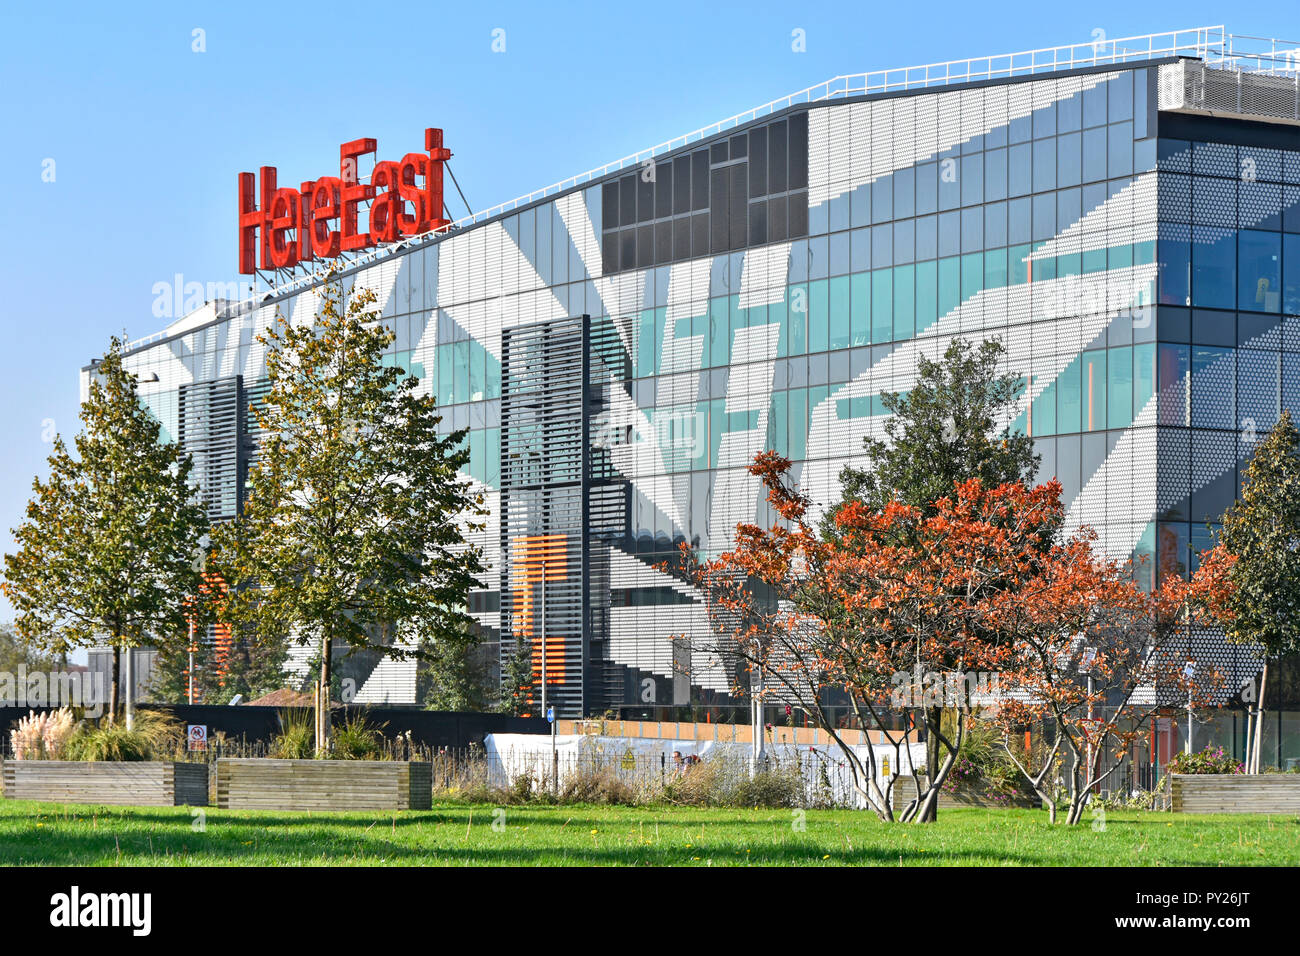 HereEast or Here East real estate was Olympics Media Building now modern innovation centre for business technology & media in Hackney Wick London UK Stock Photo